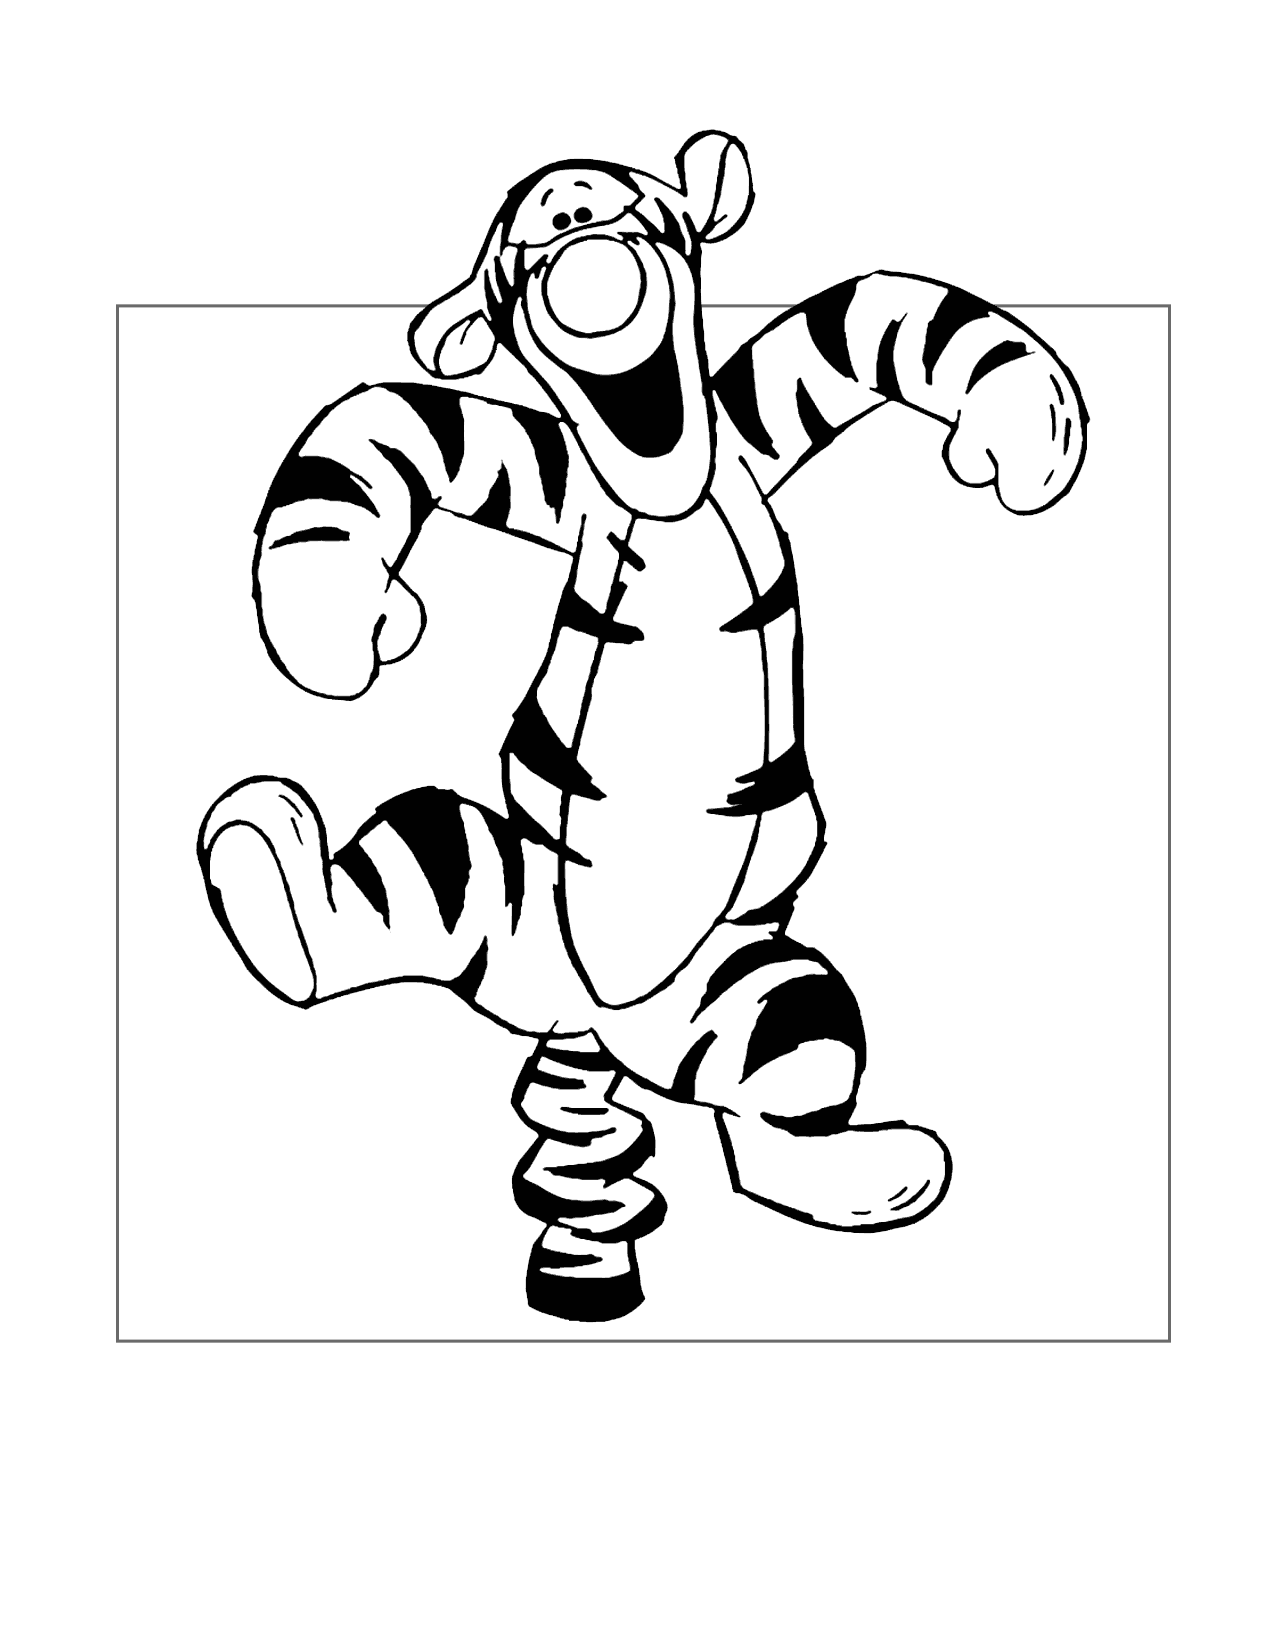 Tigger Bouncing On His Tail Coloring Page